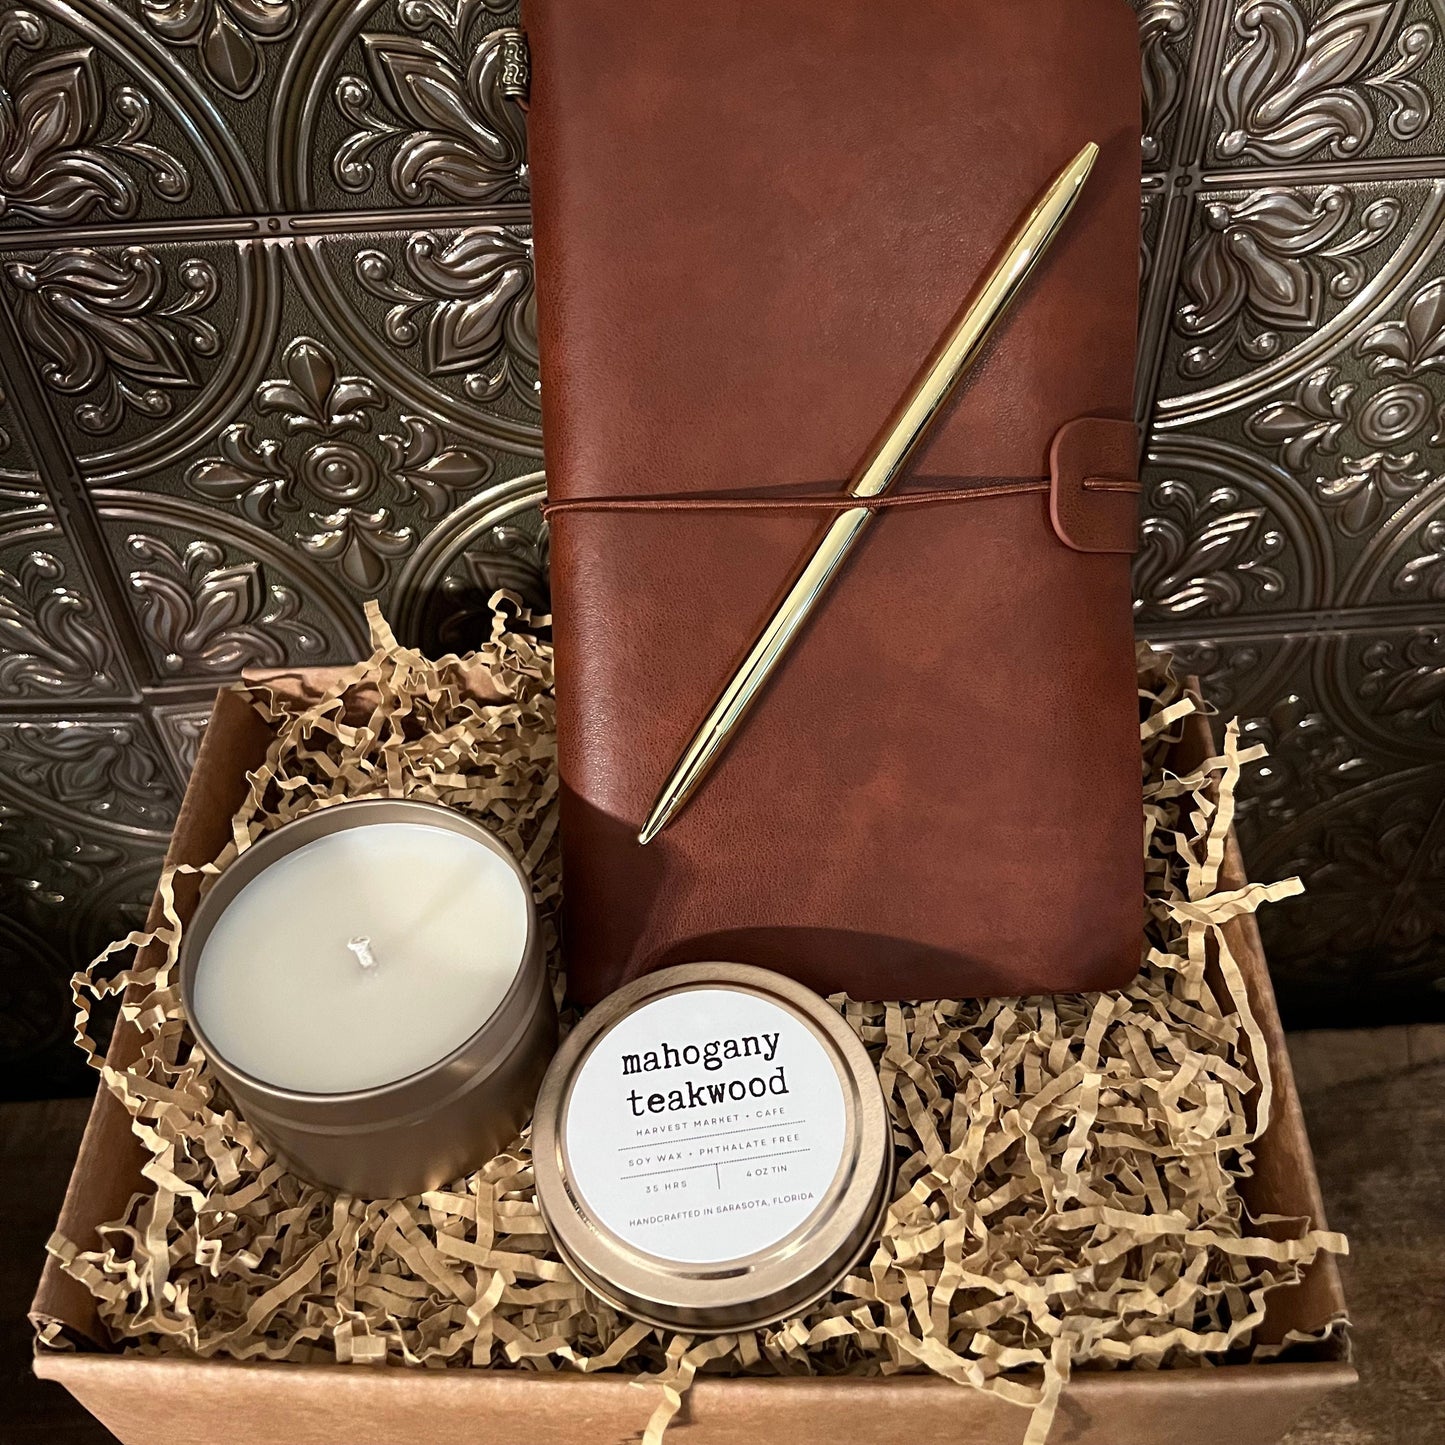 Thank You Gift l Think Of You Gift l Custom Gift l Journal Gift l Candle Gift l Appreciation Gift l Thank You Gift Box l Birthday Gift Box